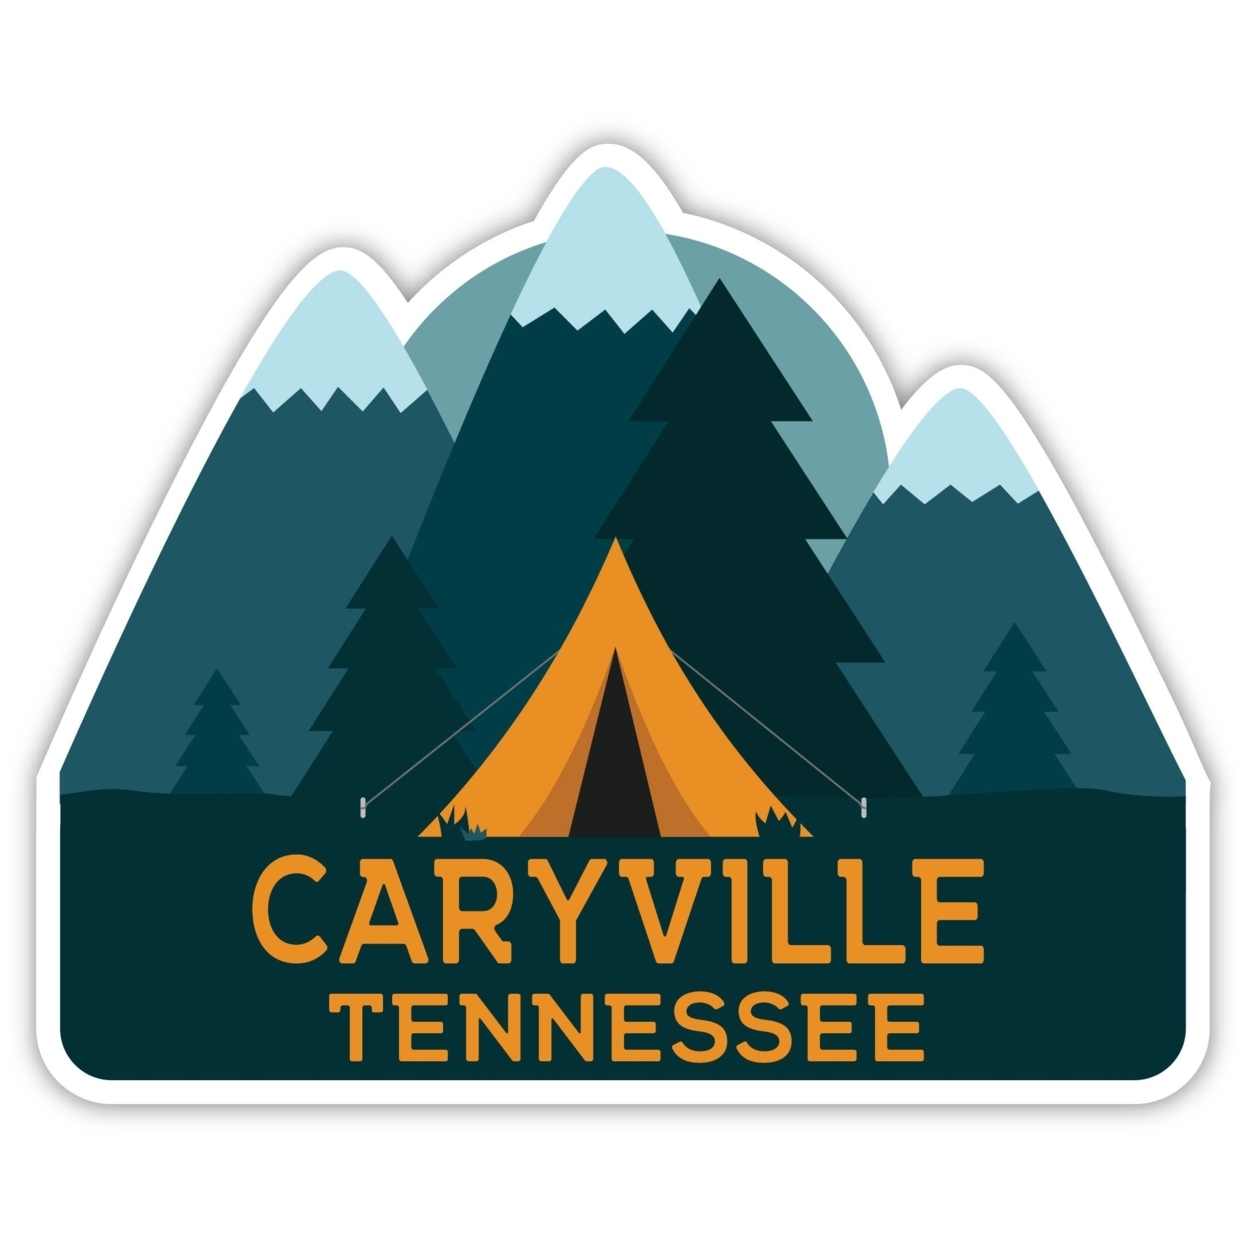 Caryville Tennessee Souvenir Decorative Stickers (Choose Theme And Size) - Single Unit, 4-Inch, Tent